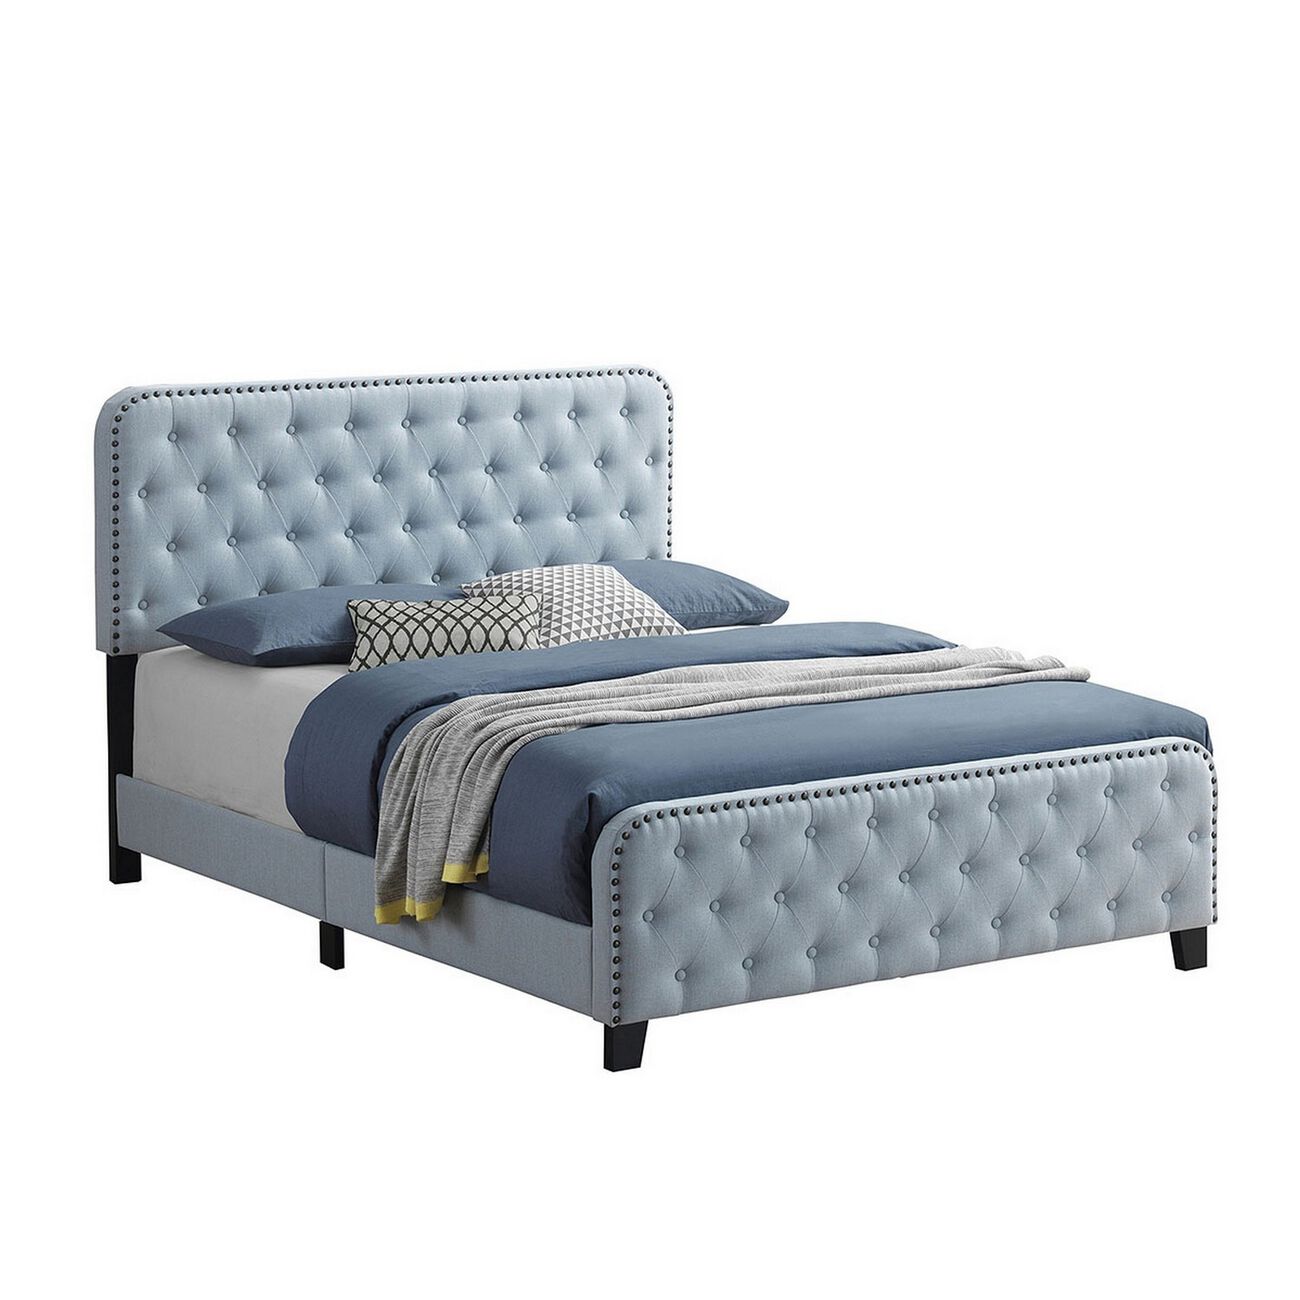 Fabric Upholstered Tufted Full Bed with Nailhead Trim, Blue